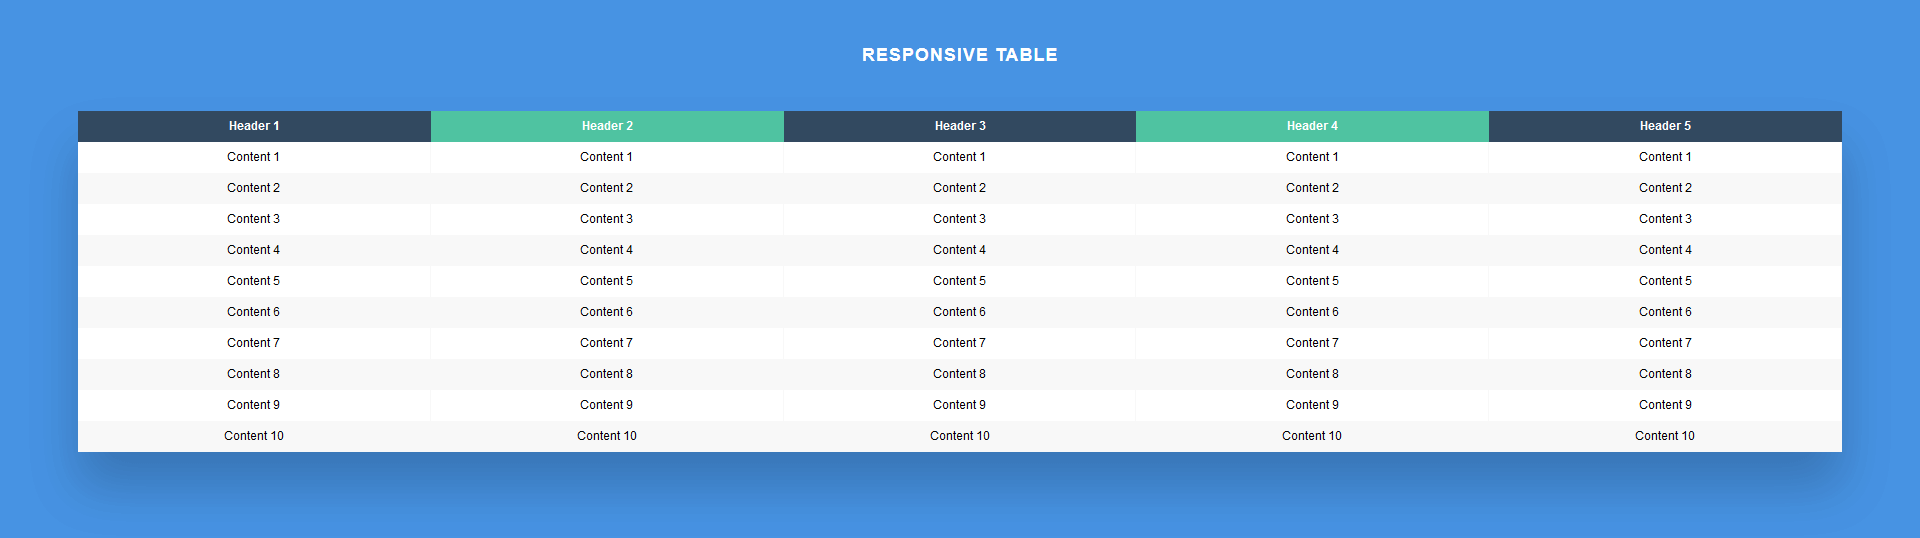 Responsive Table HTML and CSS Only